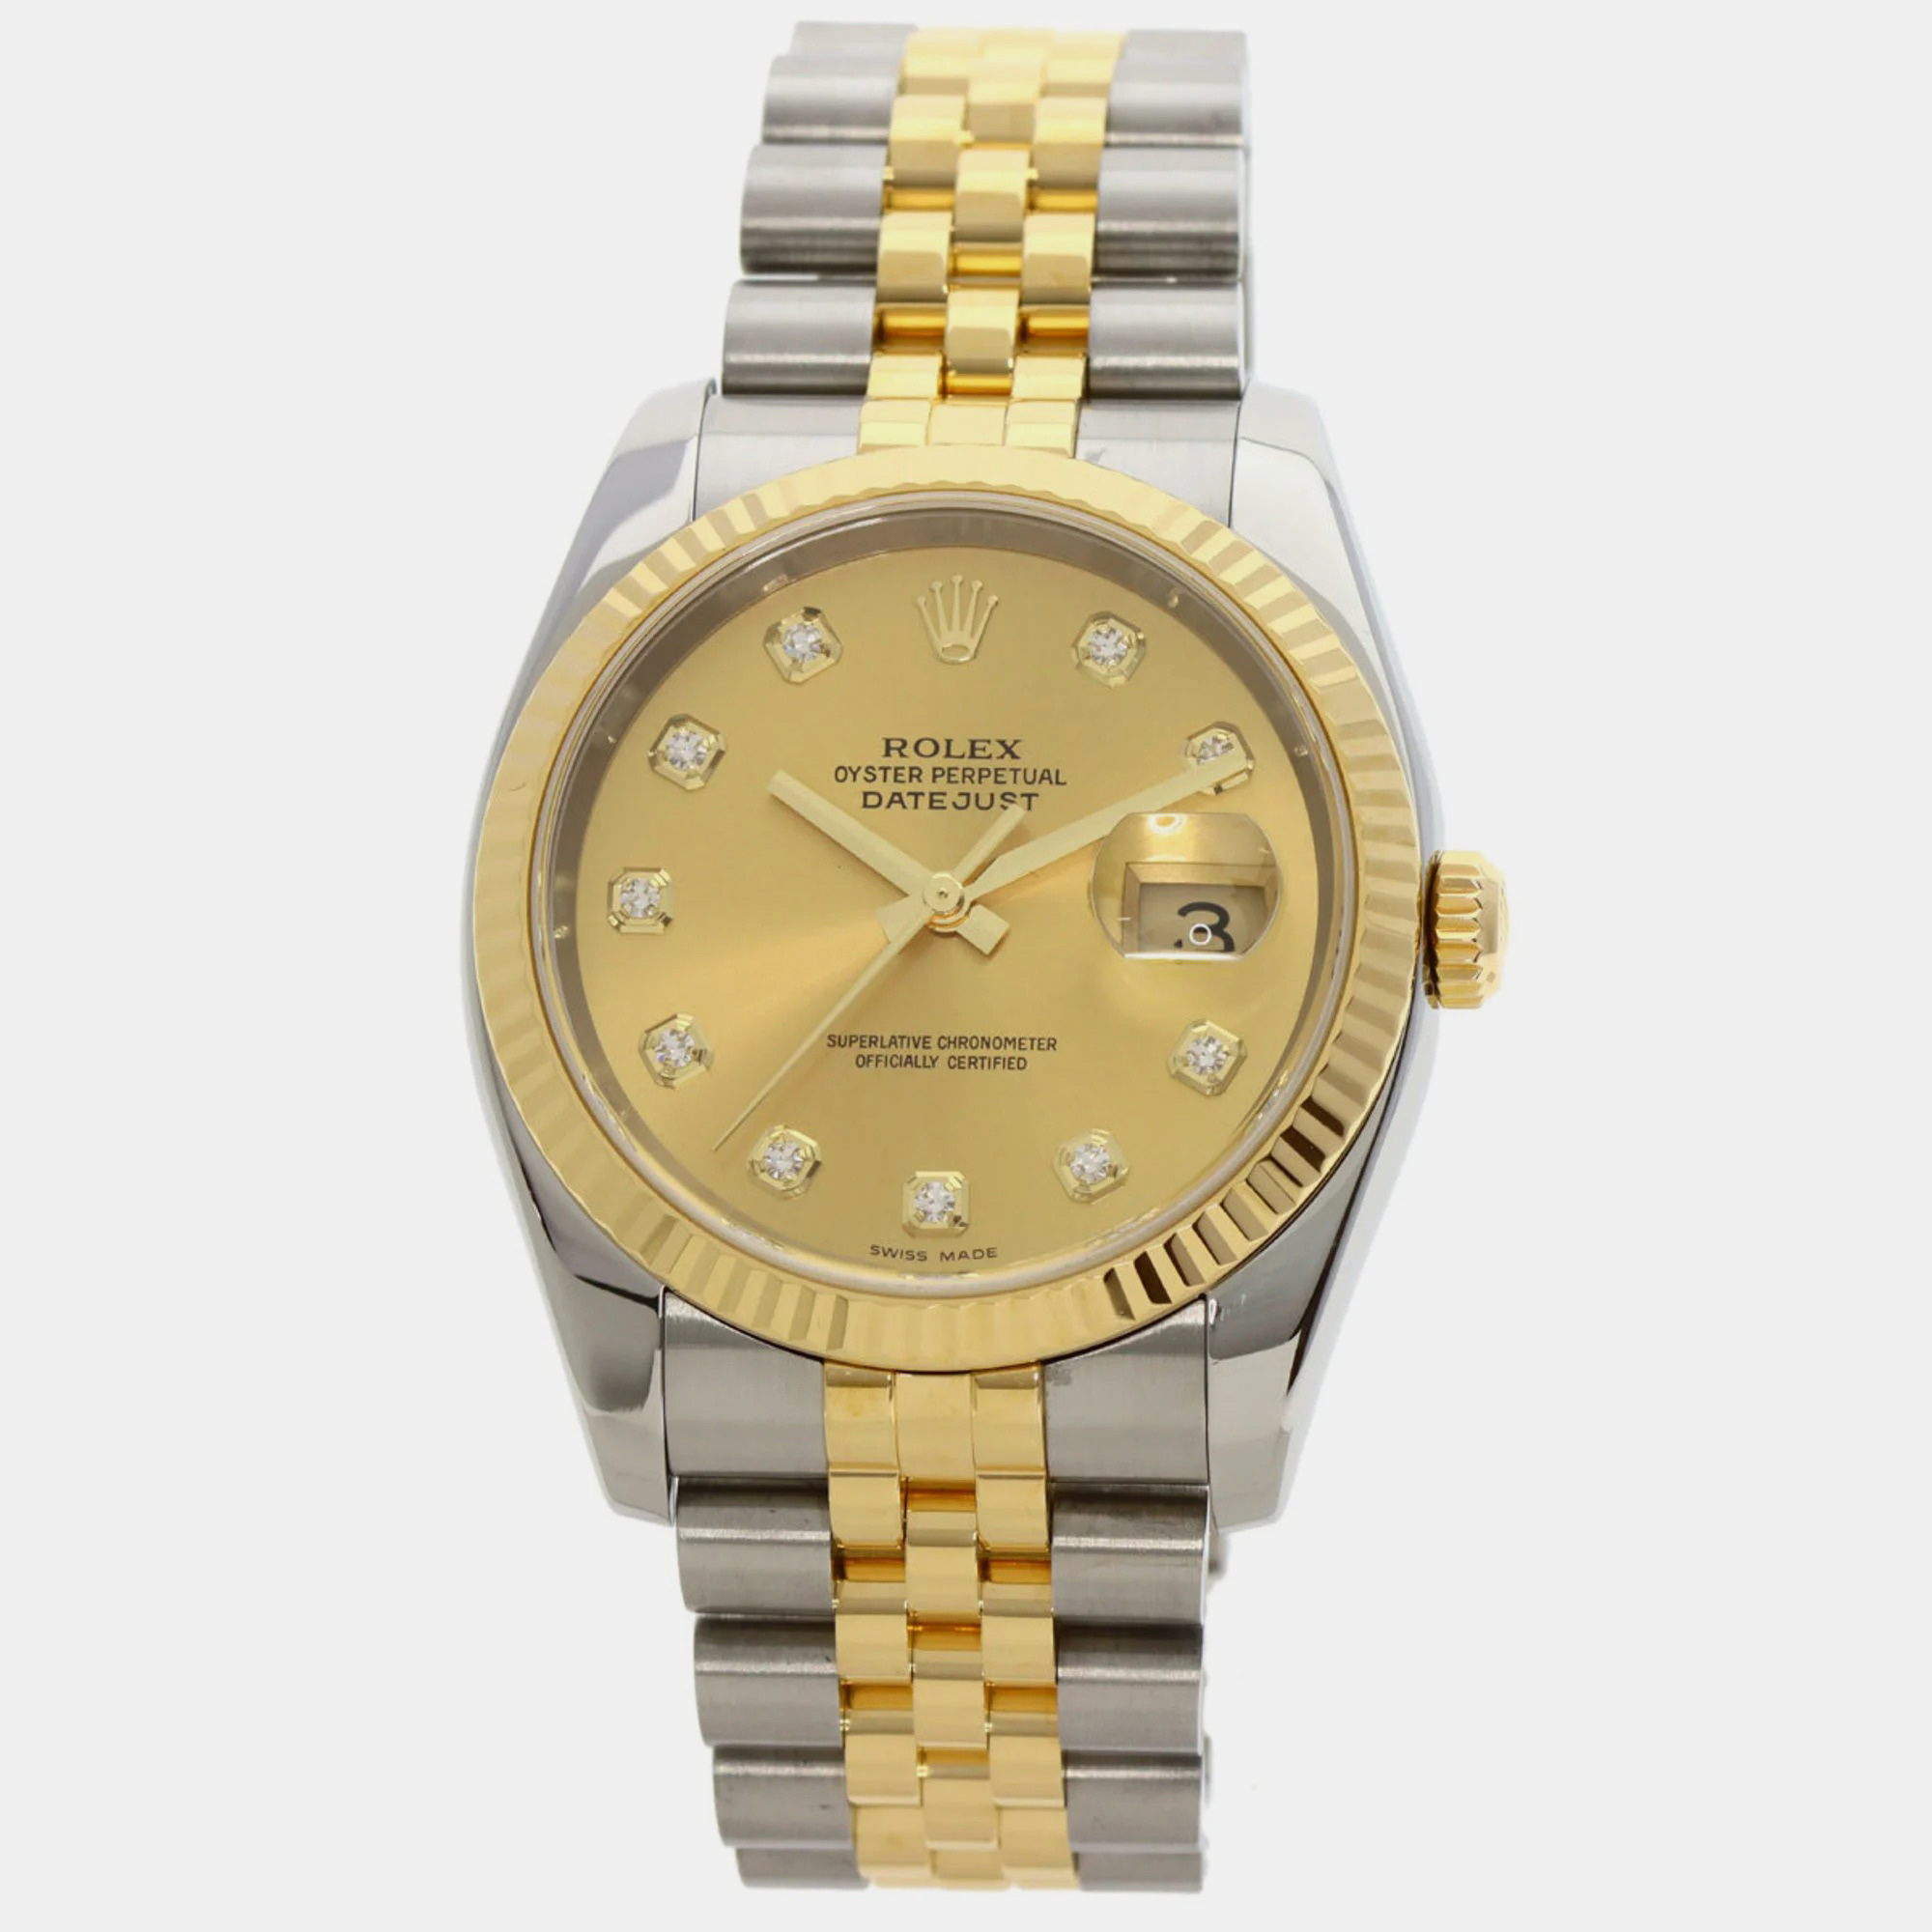 Rolex Champagne Diamond 18k Yellow Gold And Stainless Steel Datejust 116233 Automatic Men's Wristwatch 36 Mm